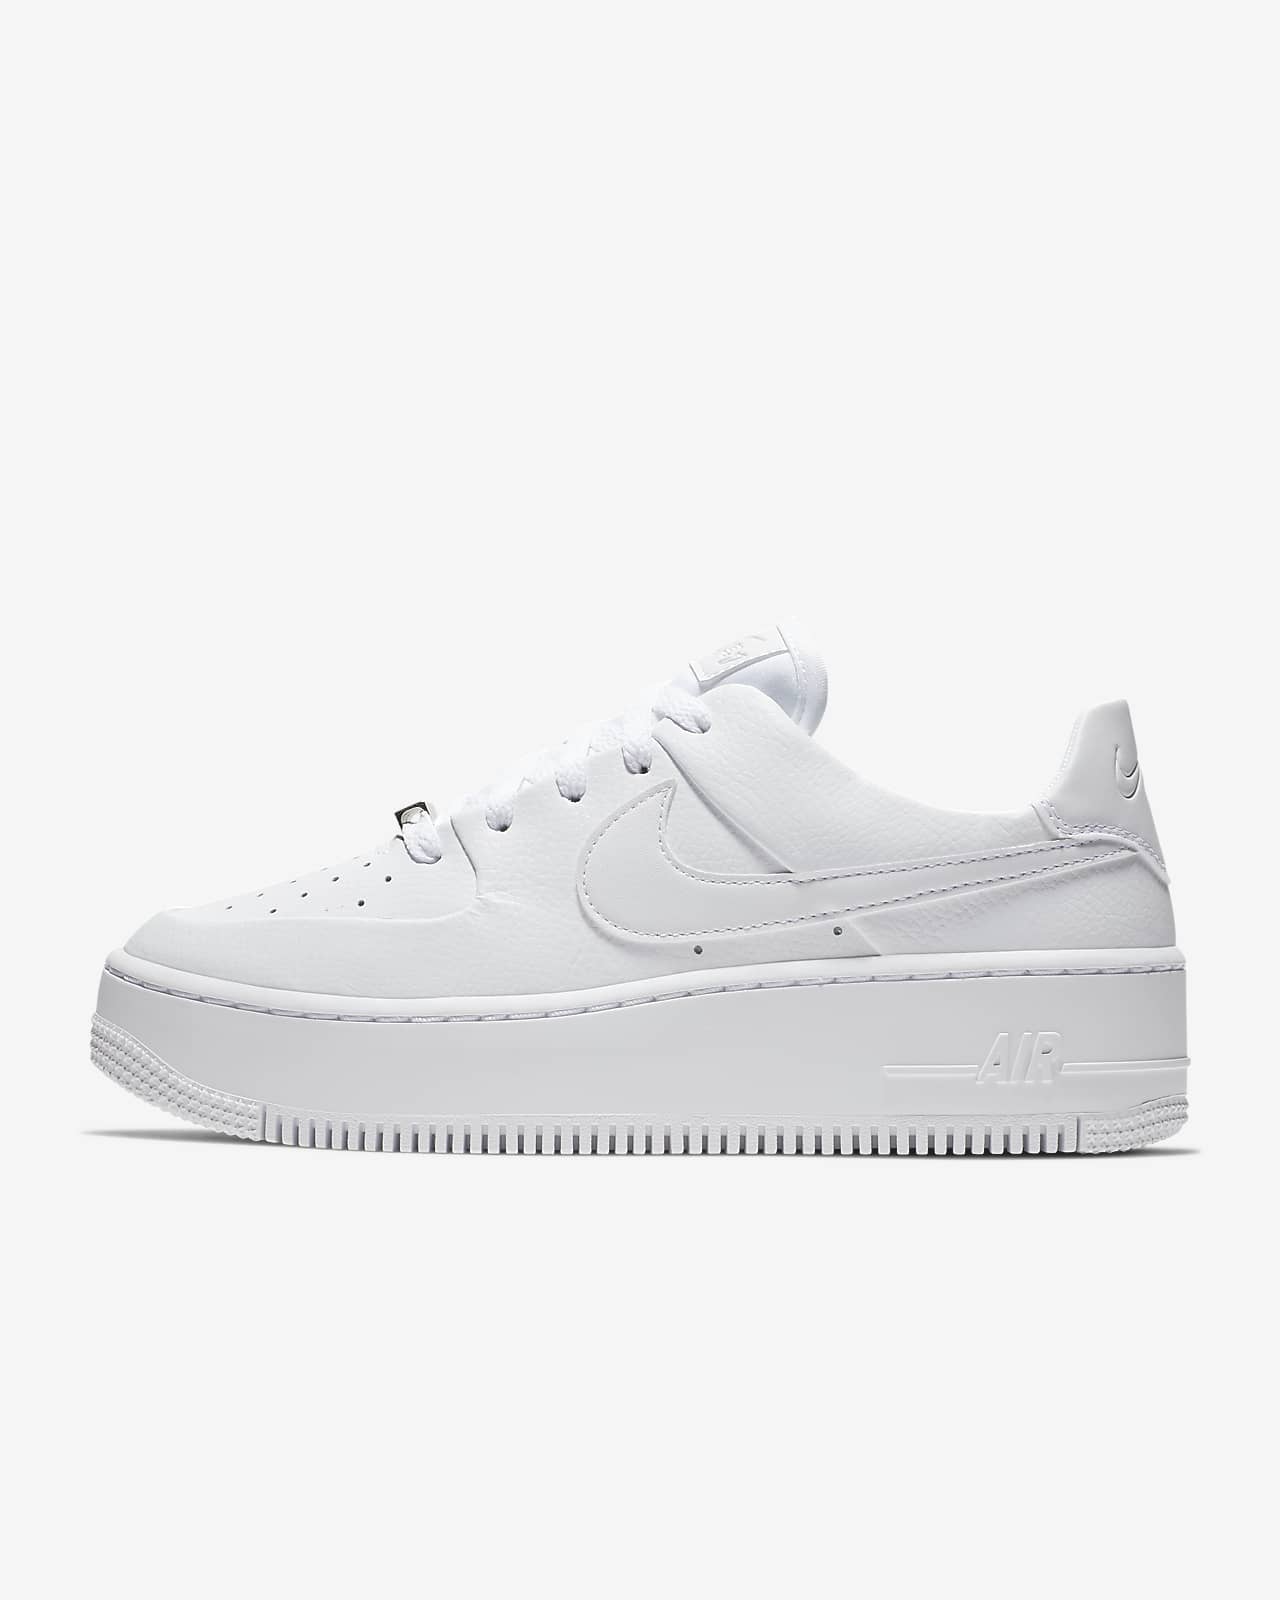 Chaussure Nike Air Force 1 Sage Low pour Femme